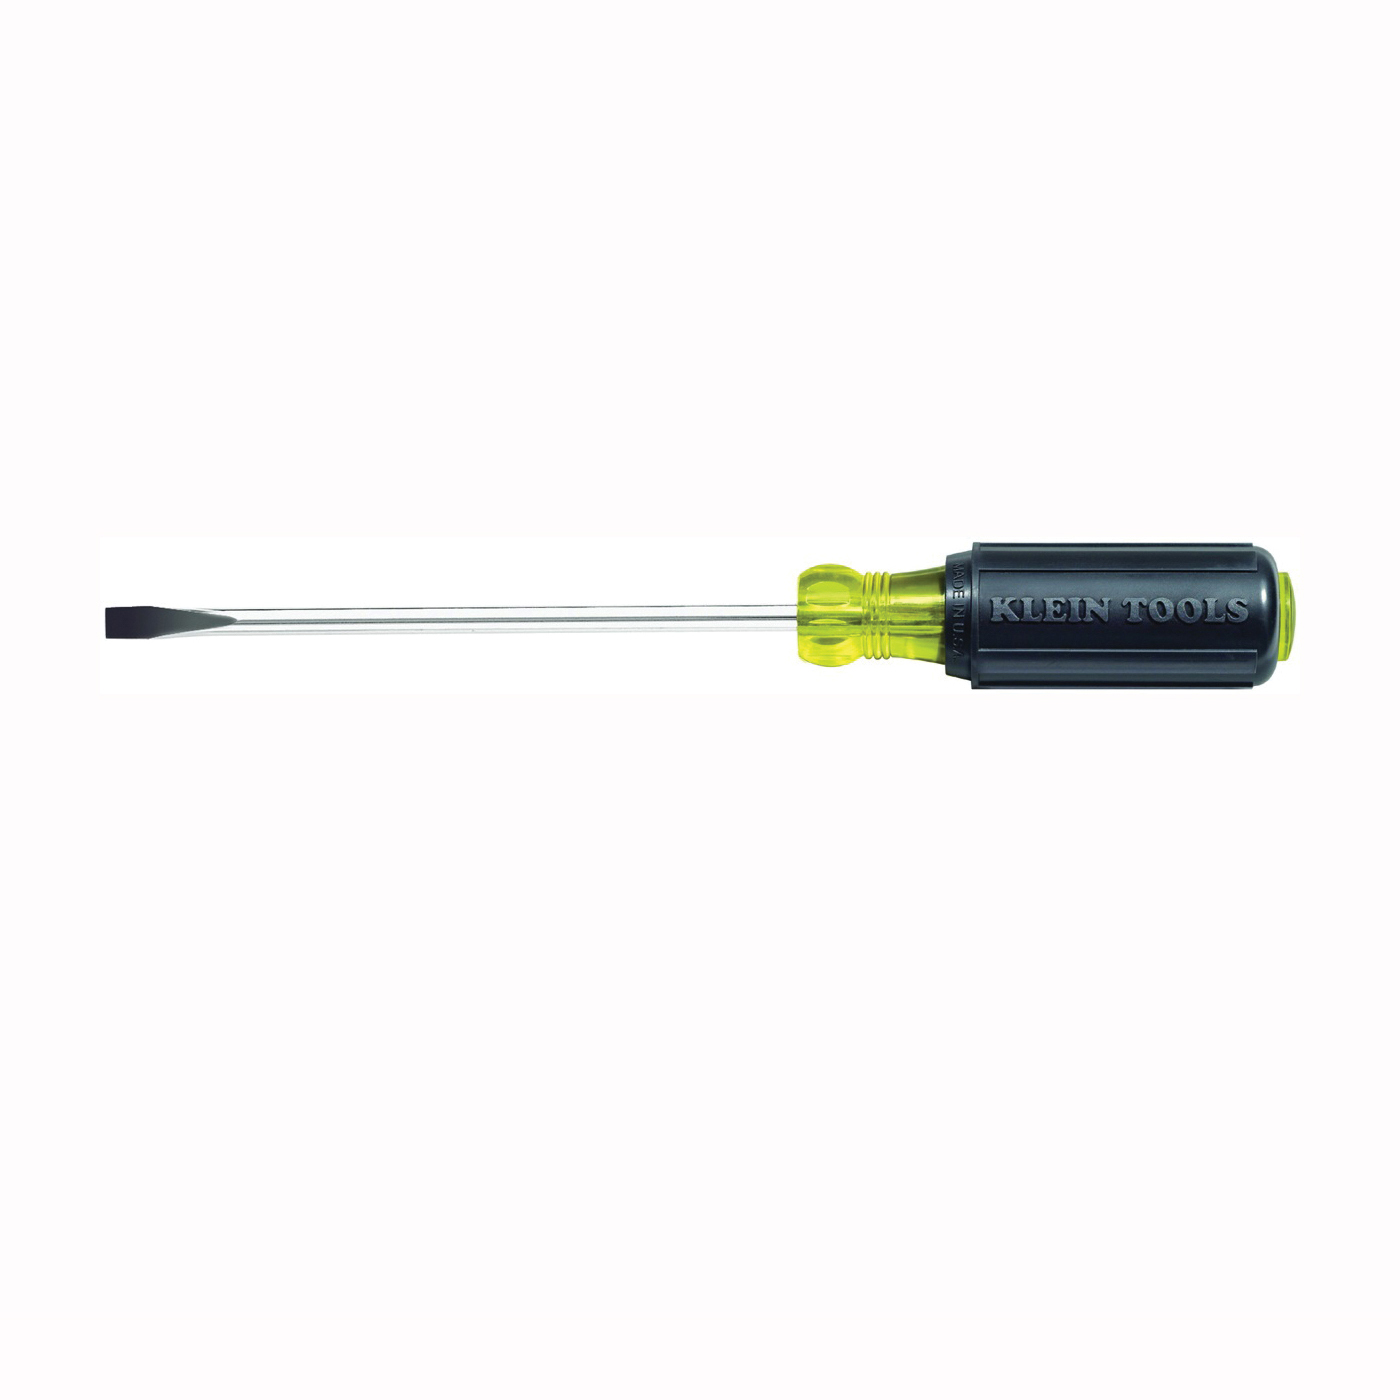 605-6 Screwdriver, 1/4 in Drive, Cabinet Drive, 10-11/32 in OAL, 6 in L Shank, Rubber Handle